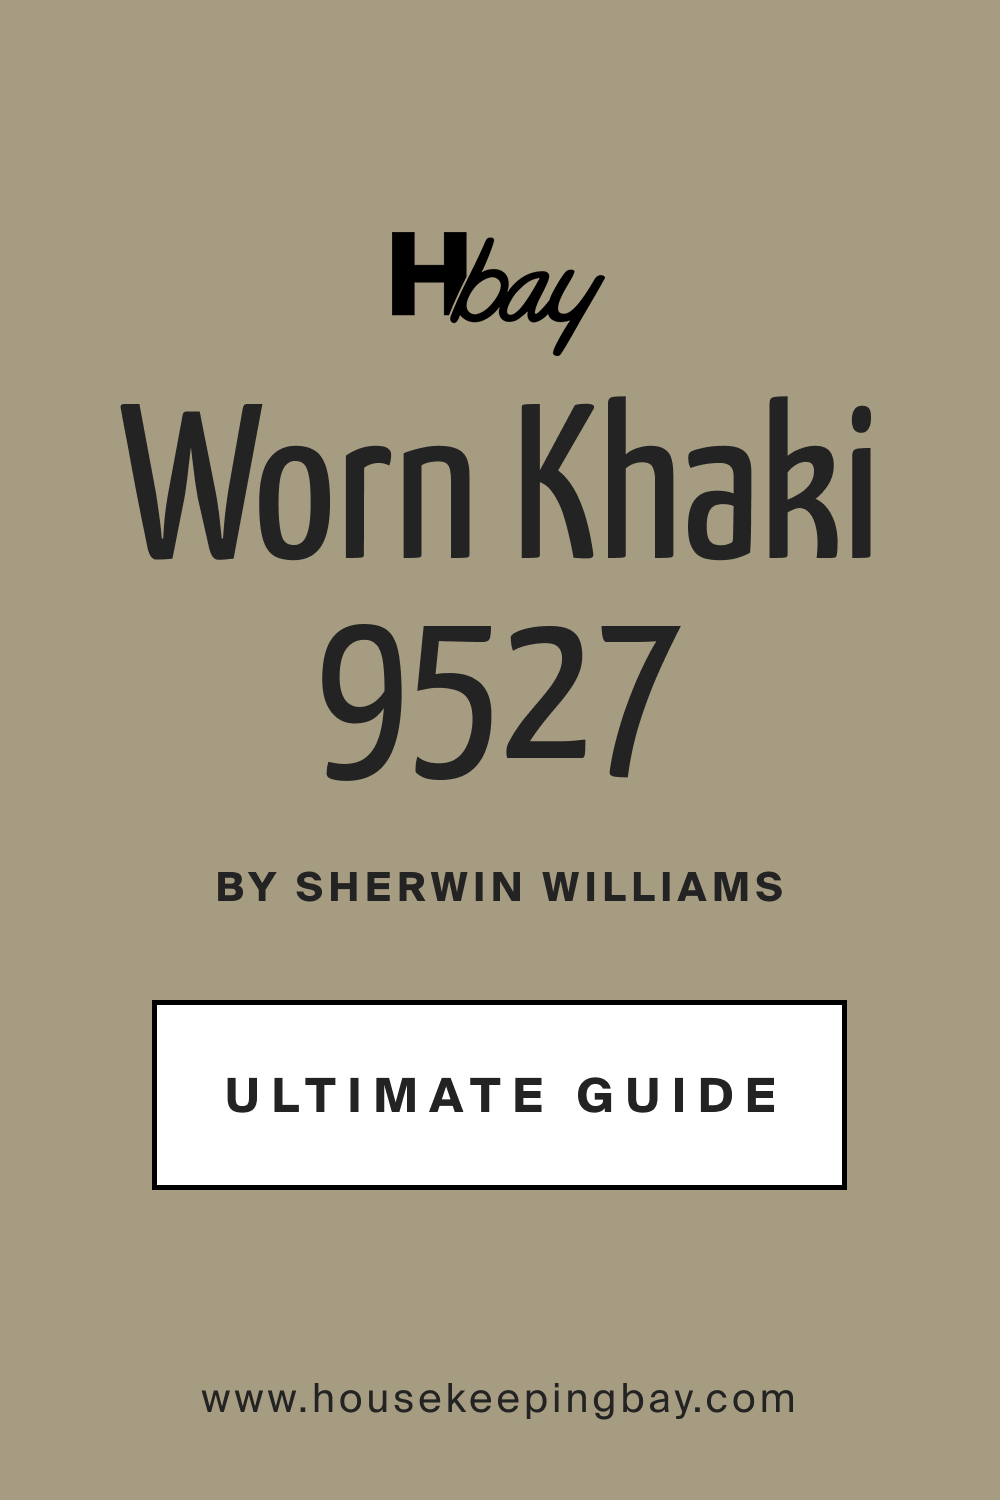 SW 9527 Worn Khaki by Sherwin Williams Ultimate Guide